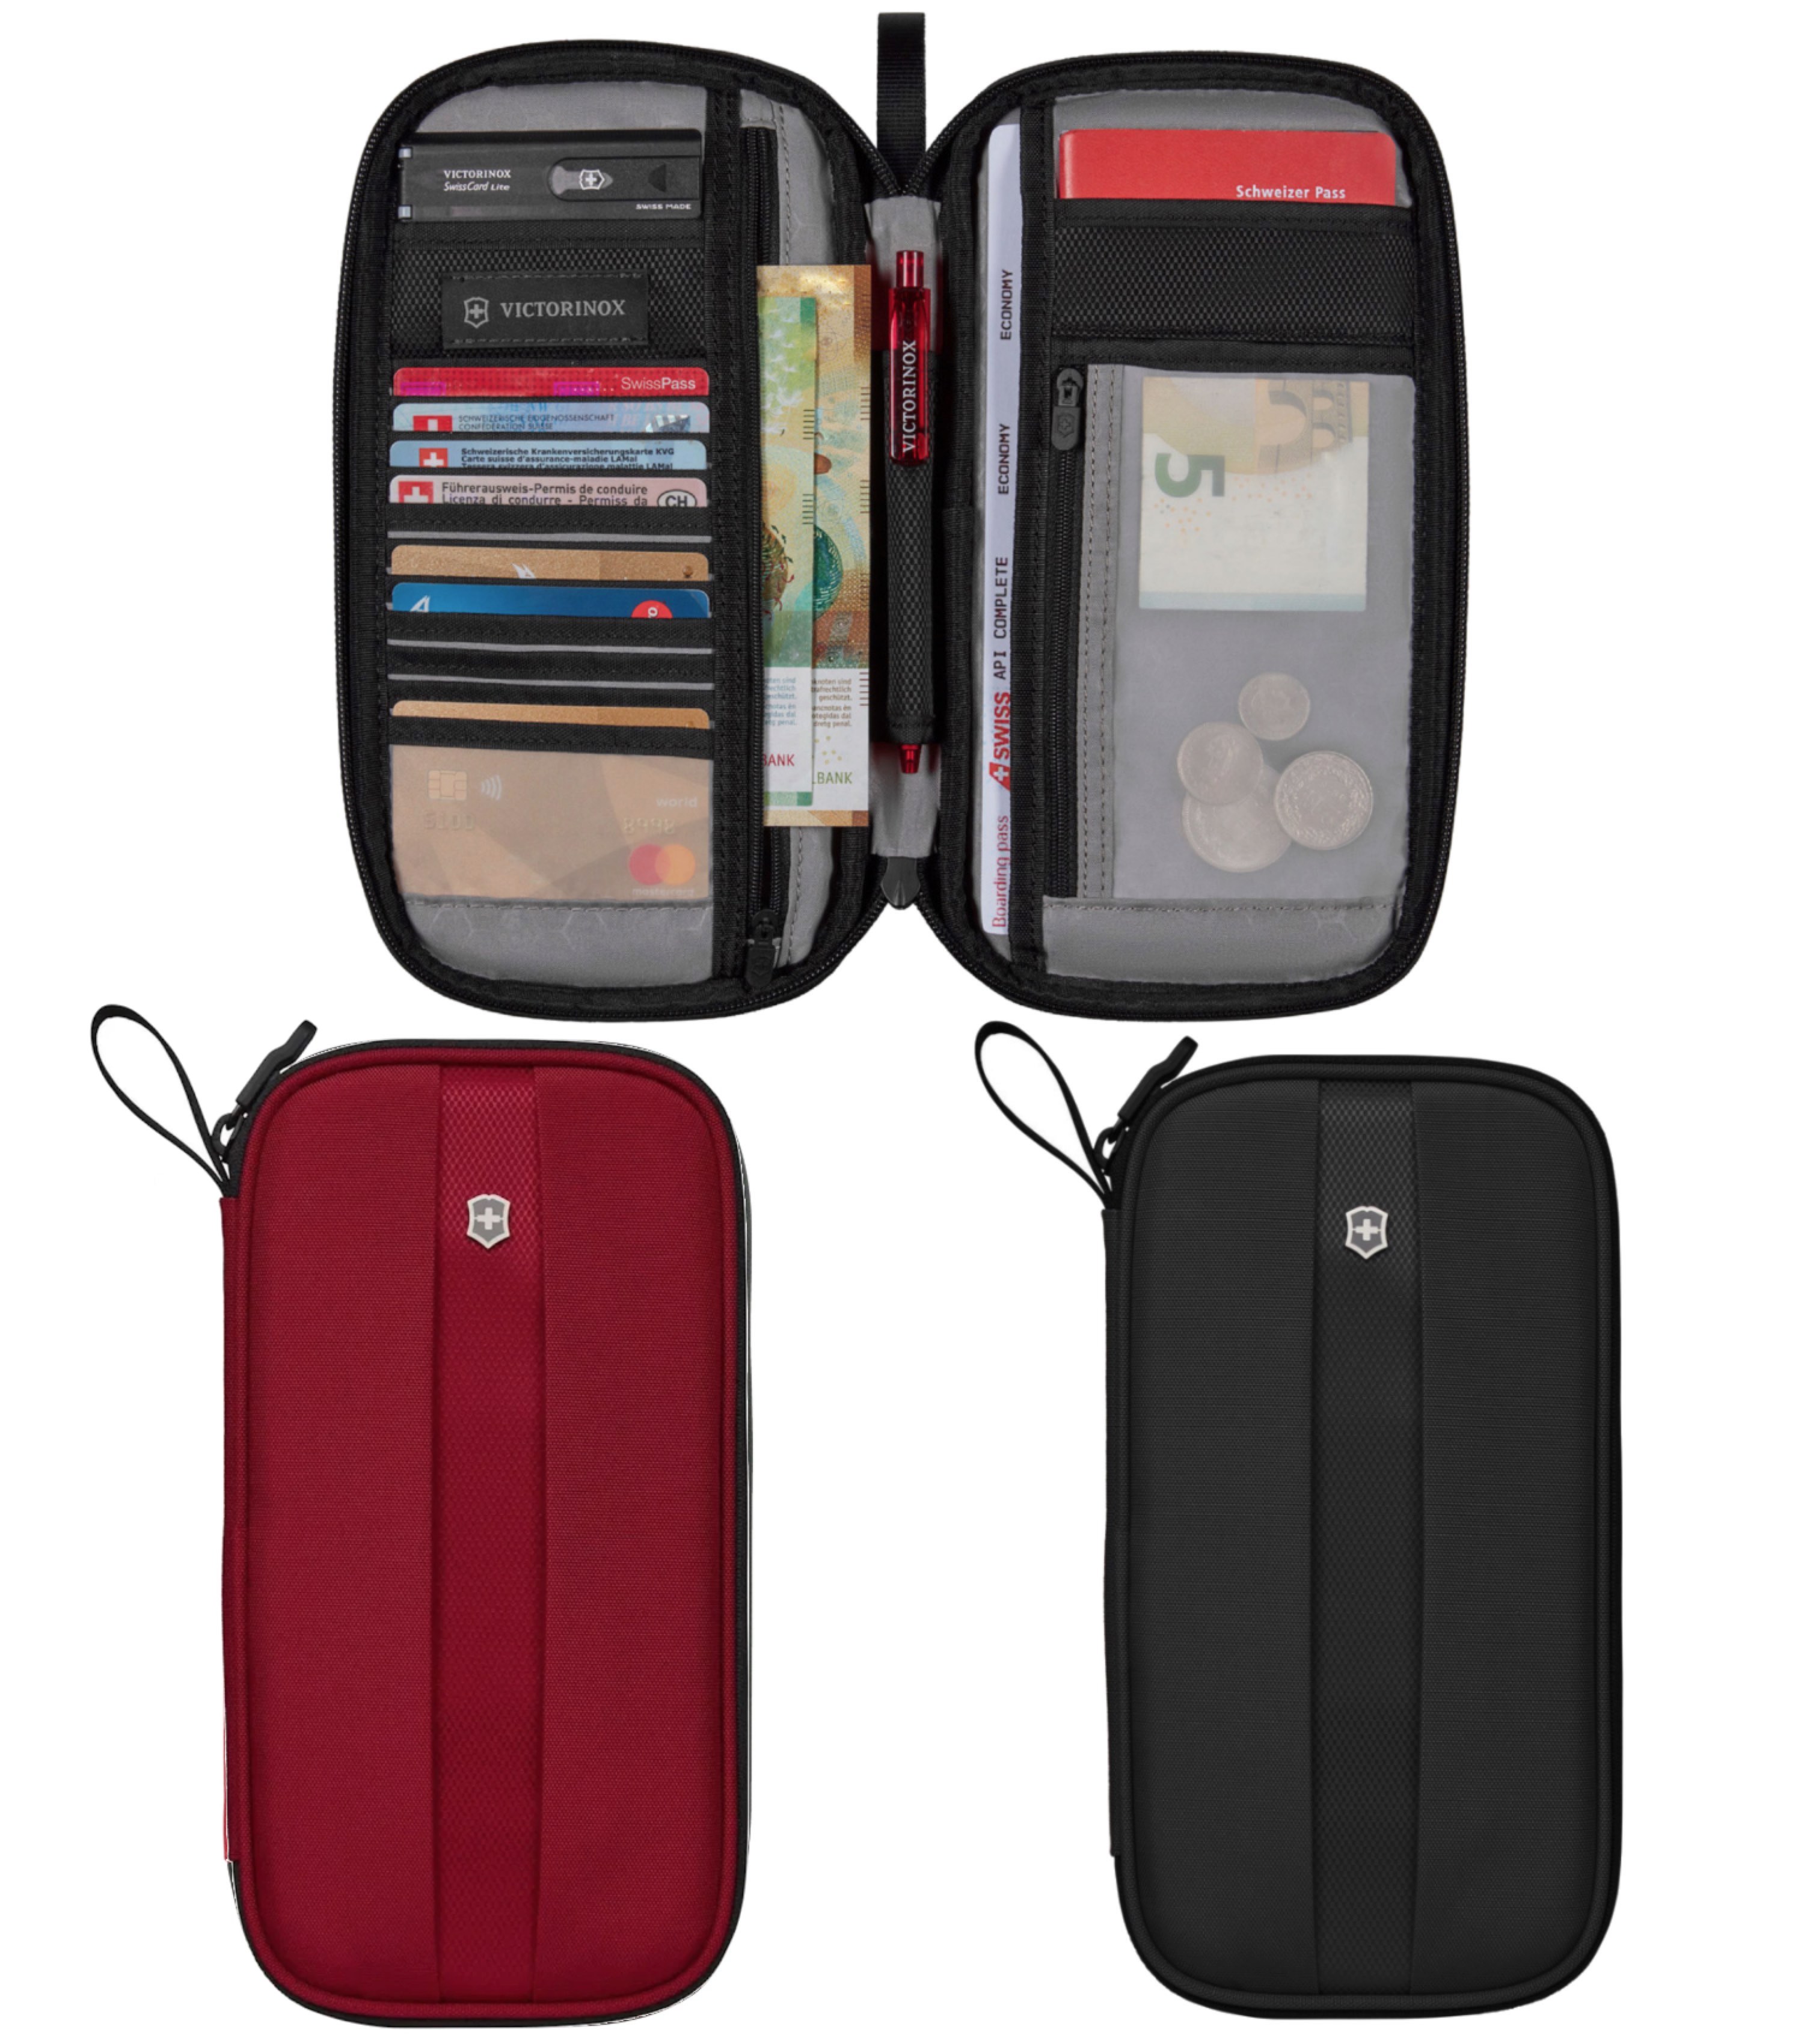 http://www.traveluniverse.com.au/Shared/Images/Product/Victorinox-Travel-Organizer-Wallet-with-RFID-Protection/610598-group.jpg